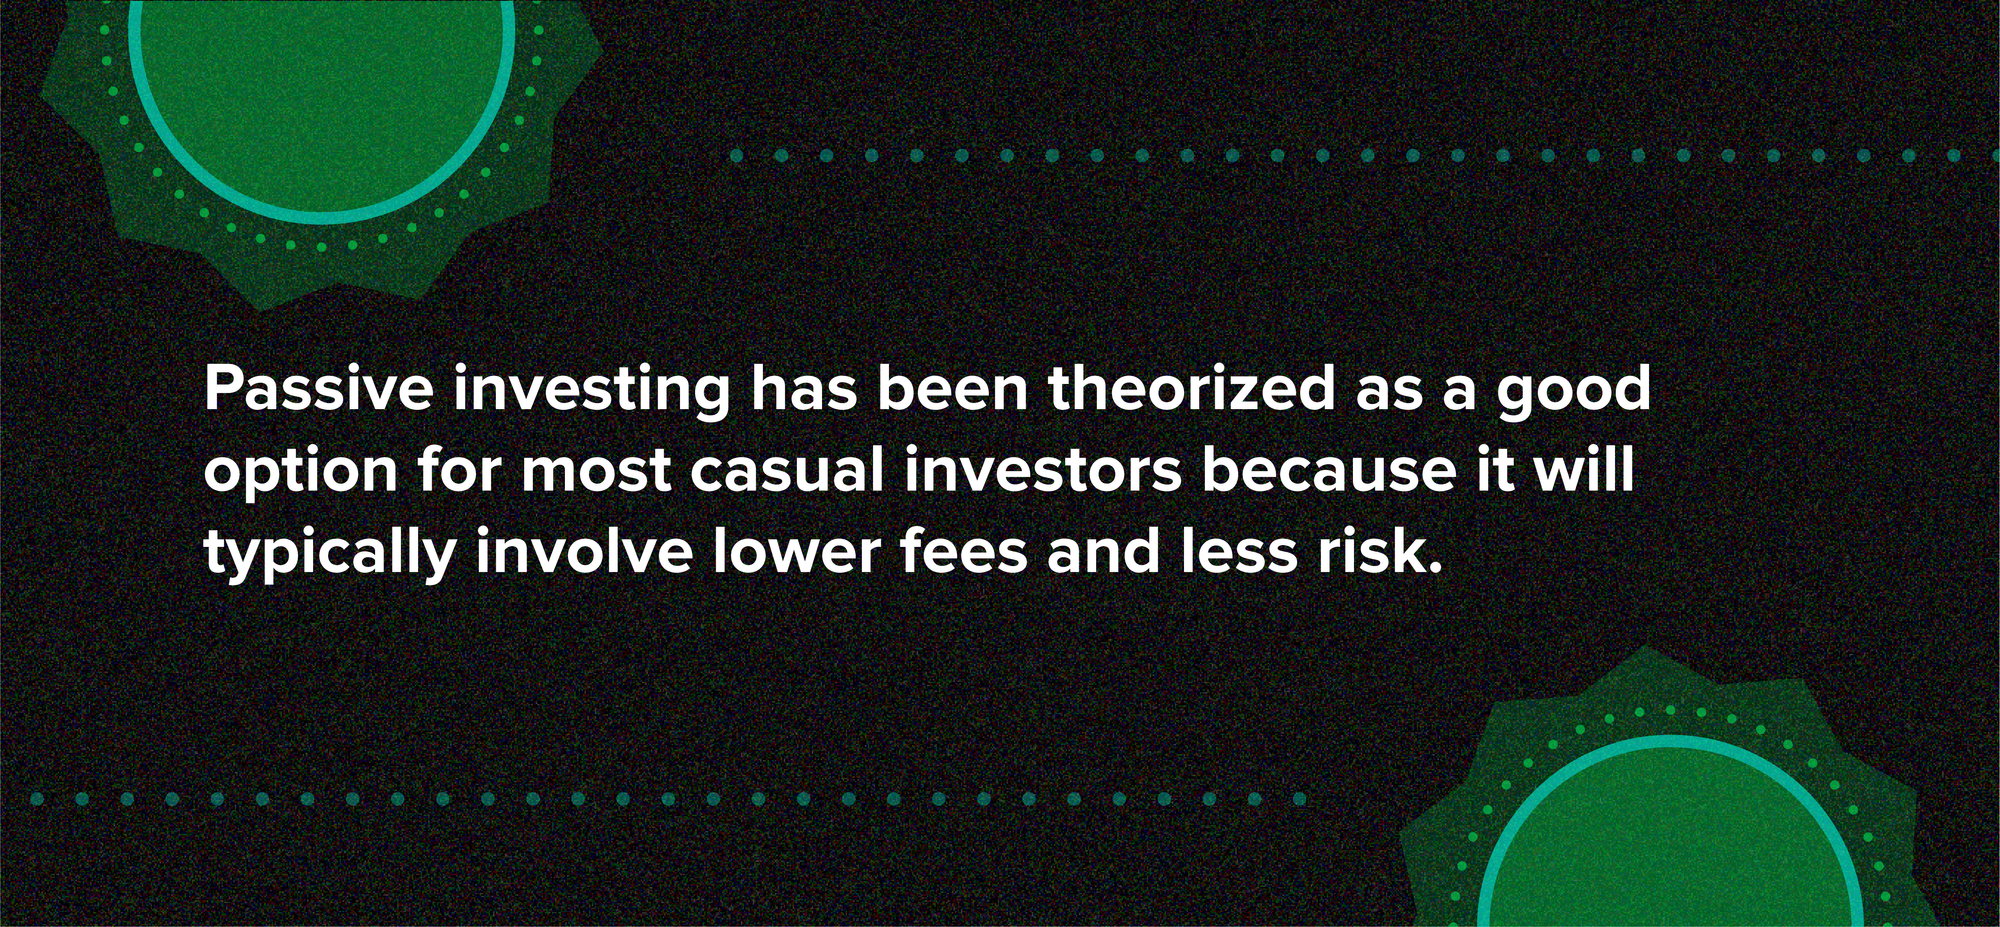 Passive investing has been theorized as a good option for most casual investors because it will typically involve lower fees and less risk.